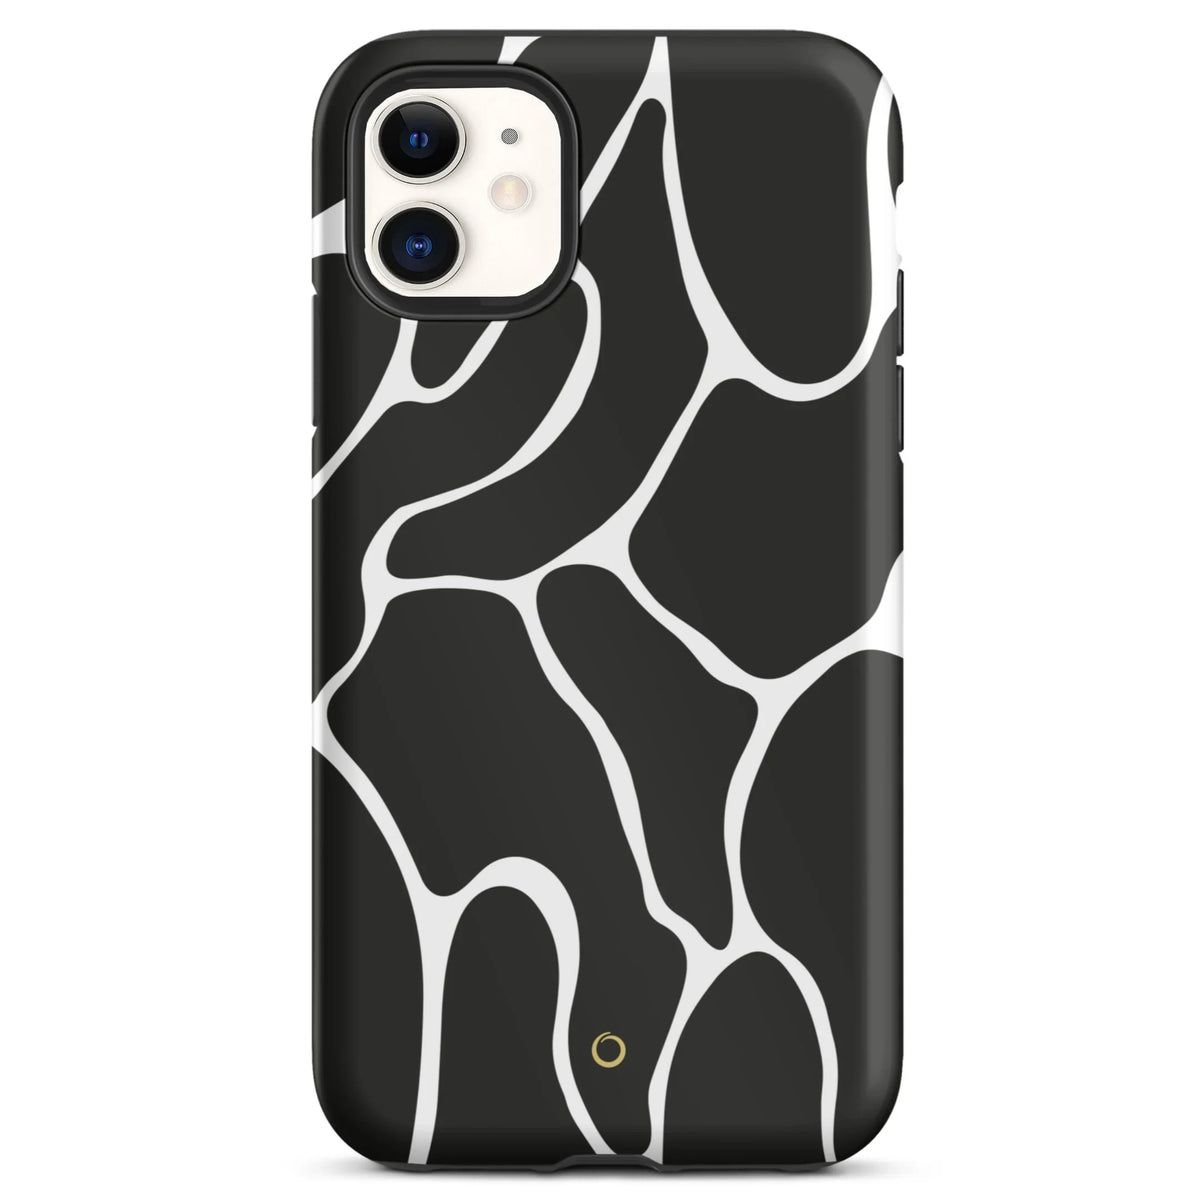 Wavy White Lines iPhone Case - iPhone 11